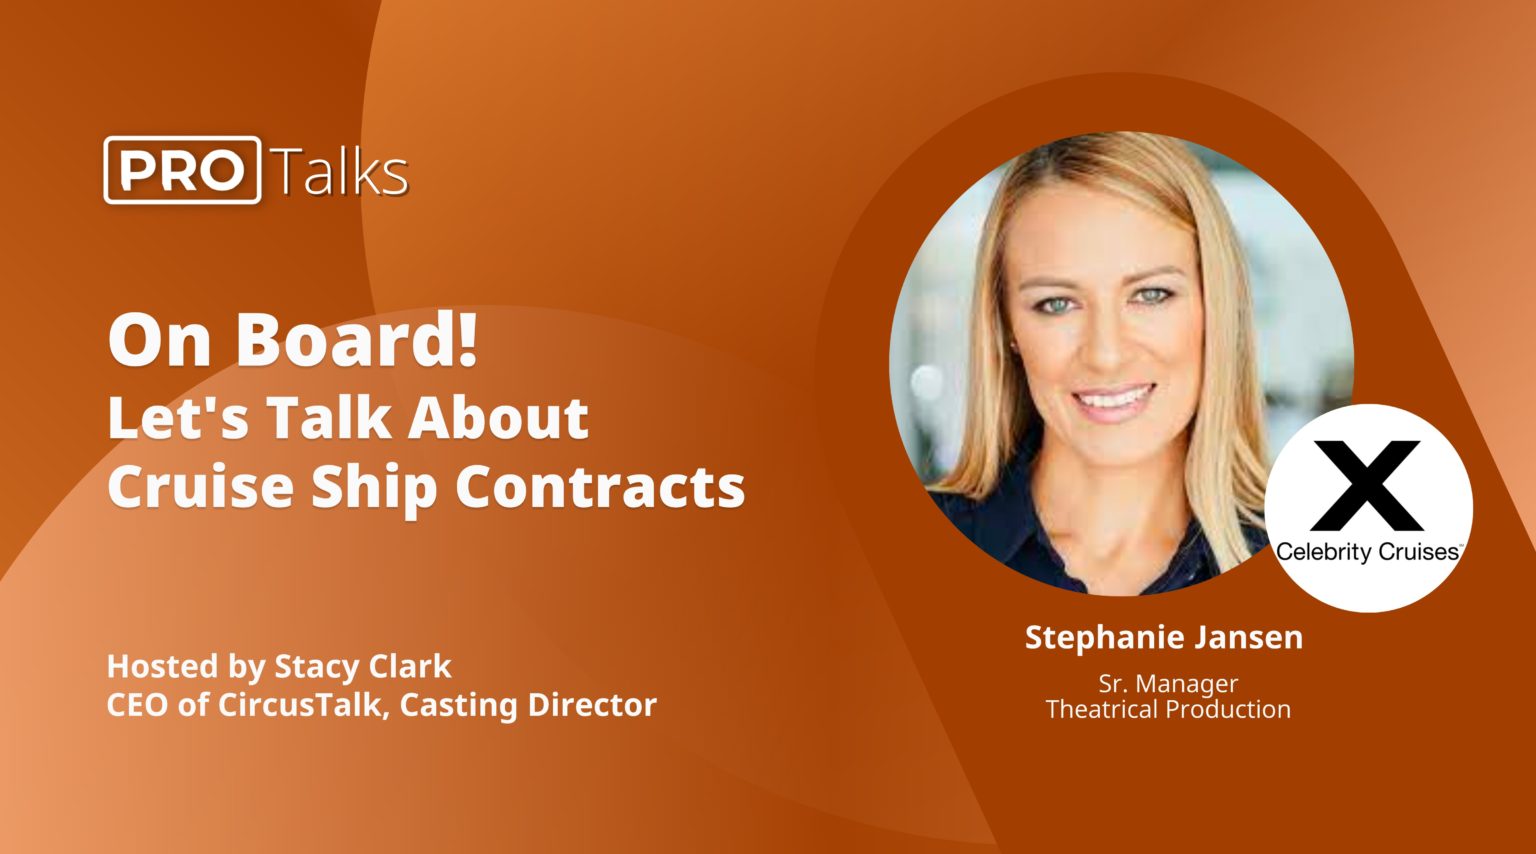 PRO Talk: On Board! Let’s Talk About Cruise Ship Contracts